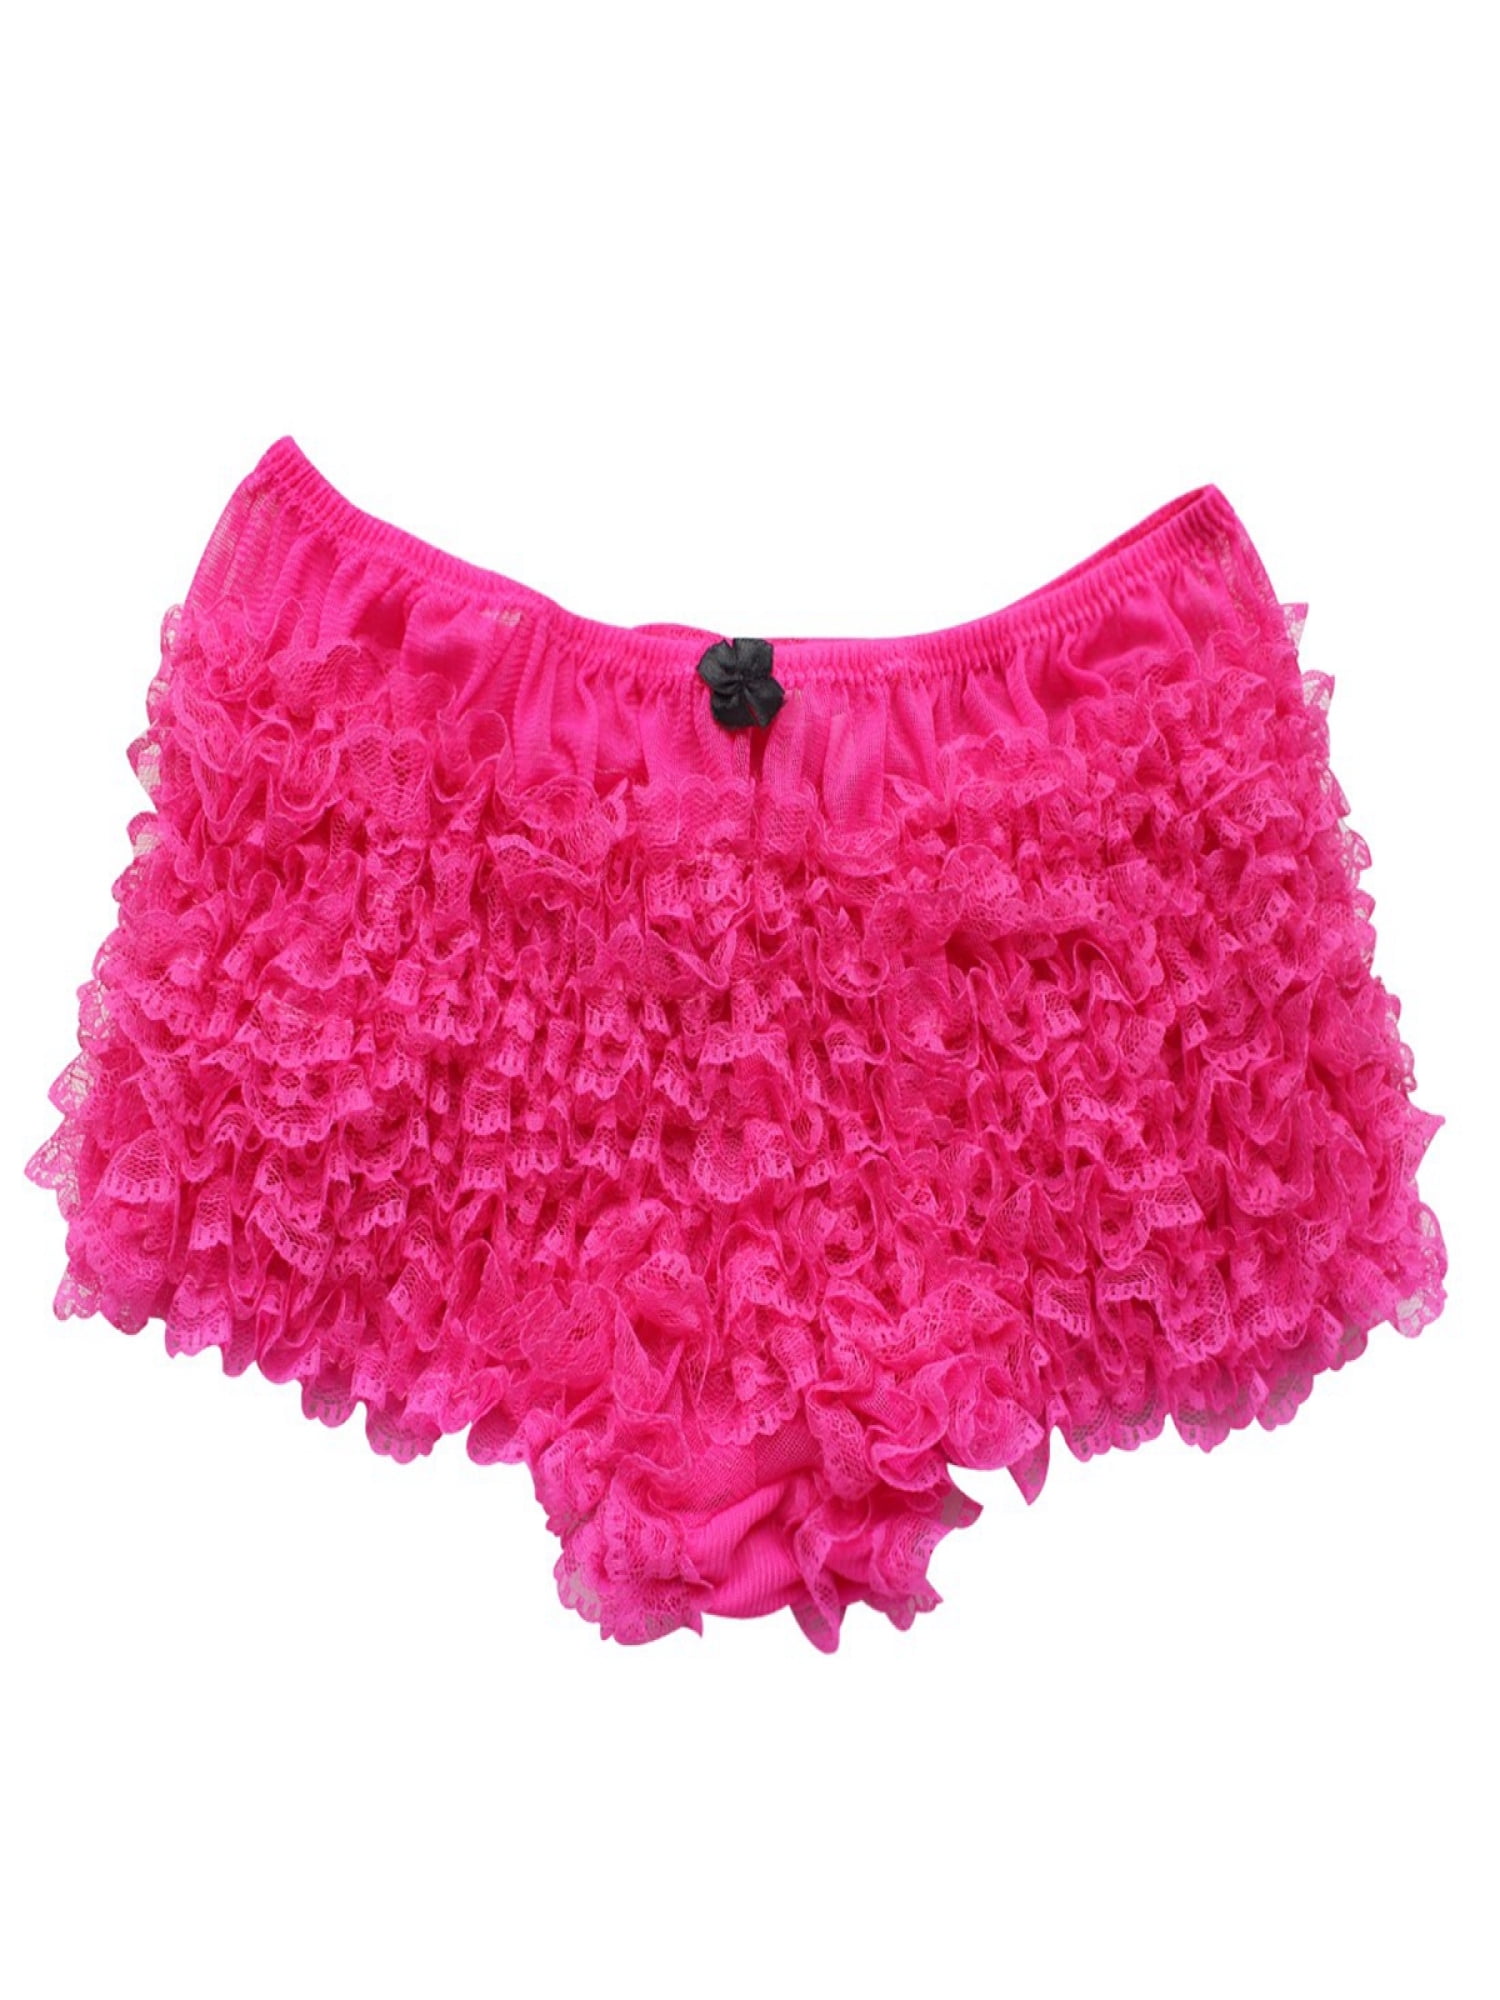 Women's Ruffled Frilly Lace Panties Bloomers Dance Knickers Pettipants  Underwear